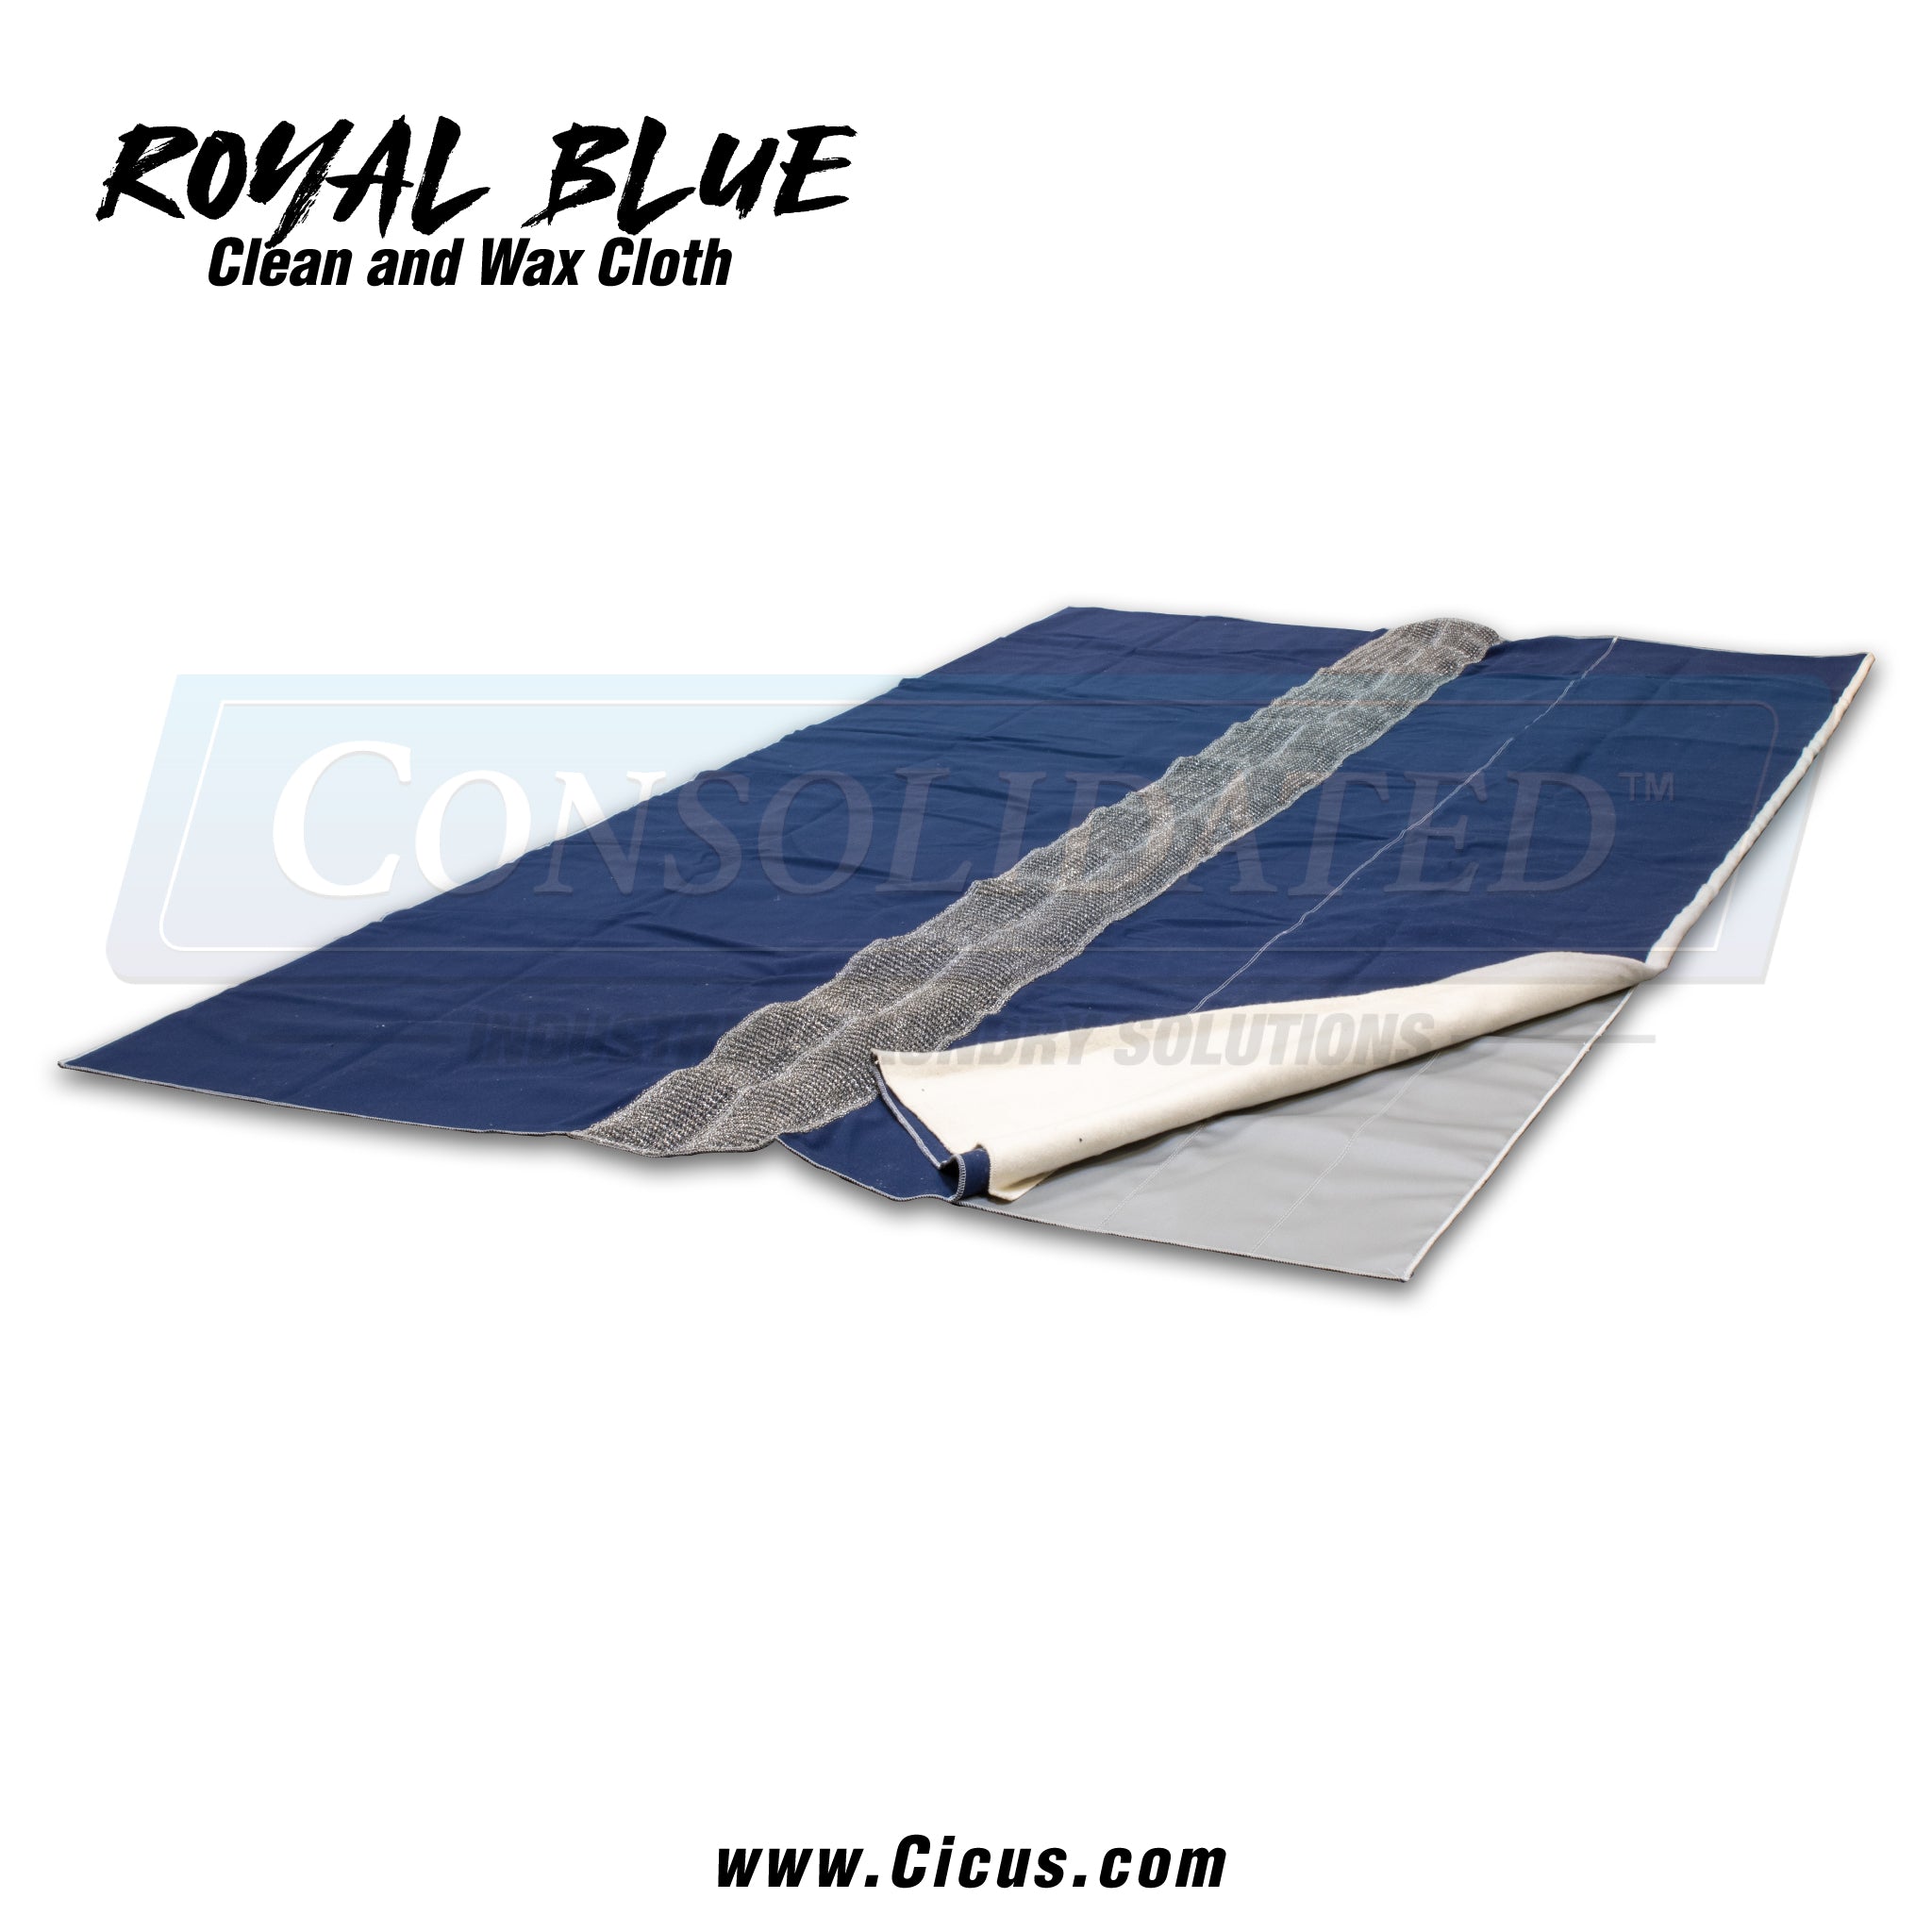 Ironer Wax and Clean Cloth - Royal Blue Mesh, Various Sizes